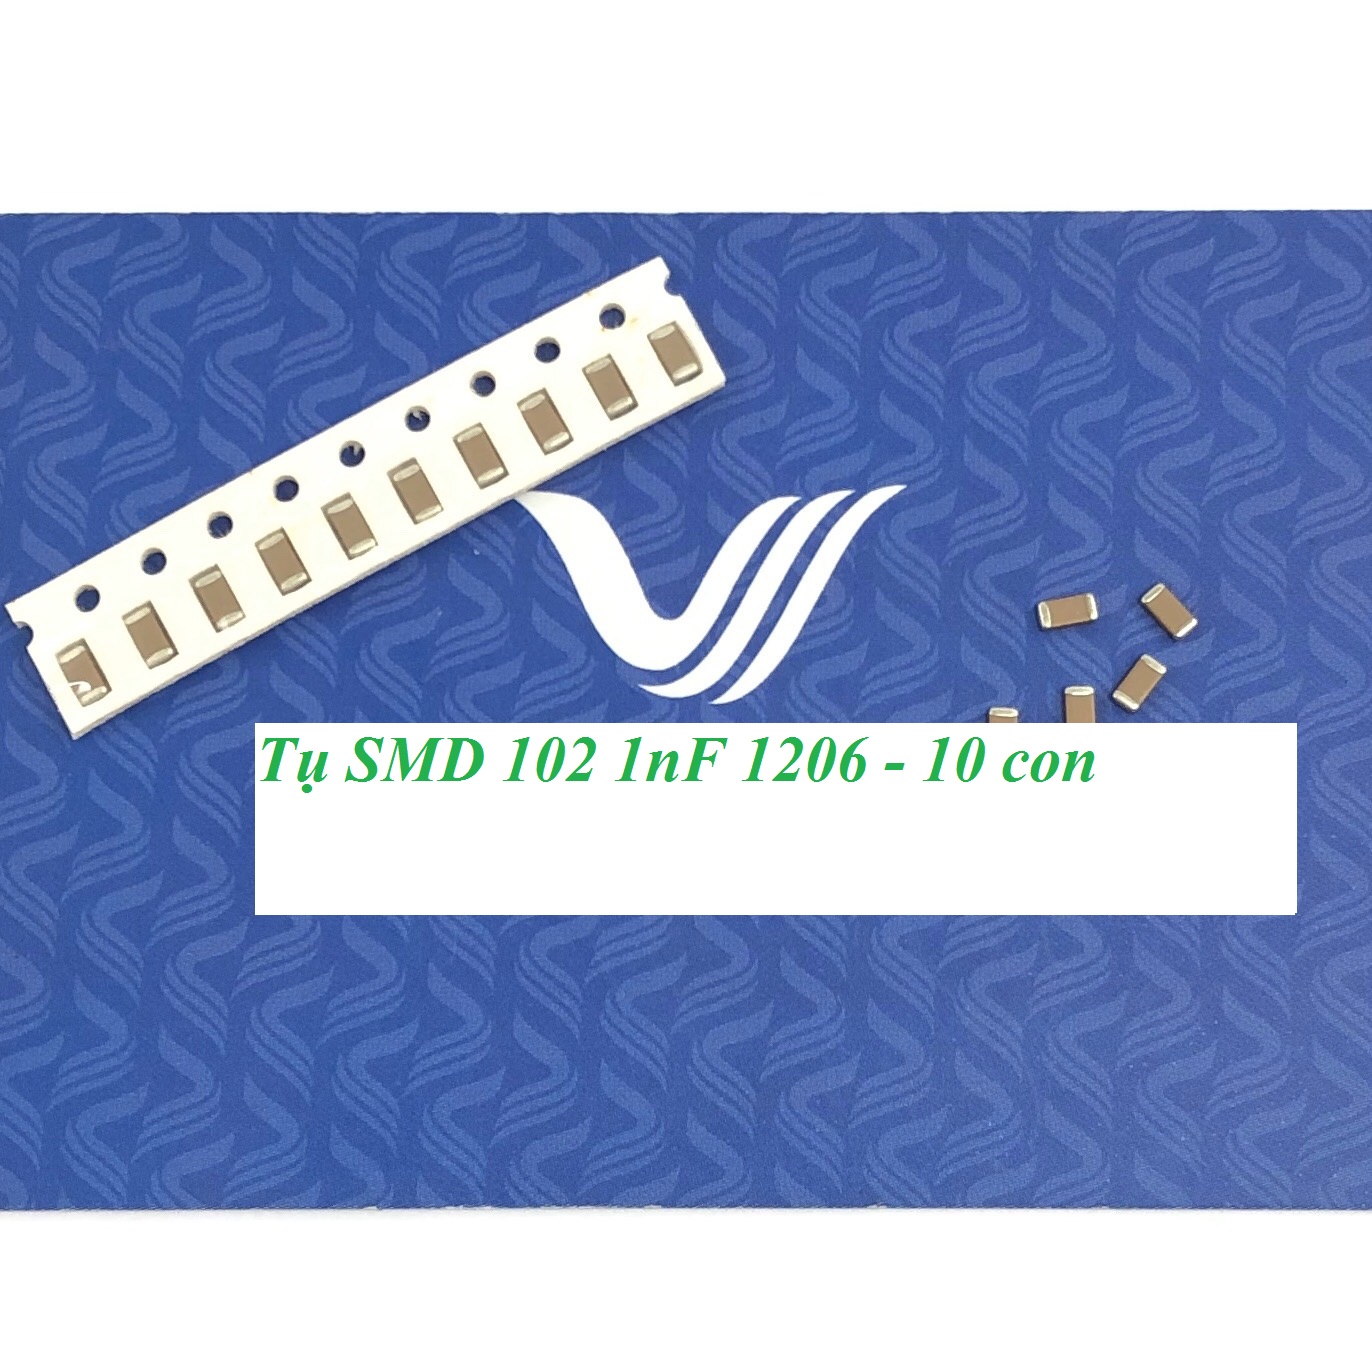 Tụ SMD 102 1nF 1206 - 10 con